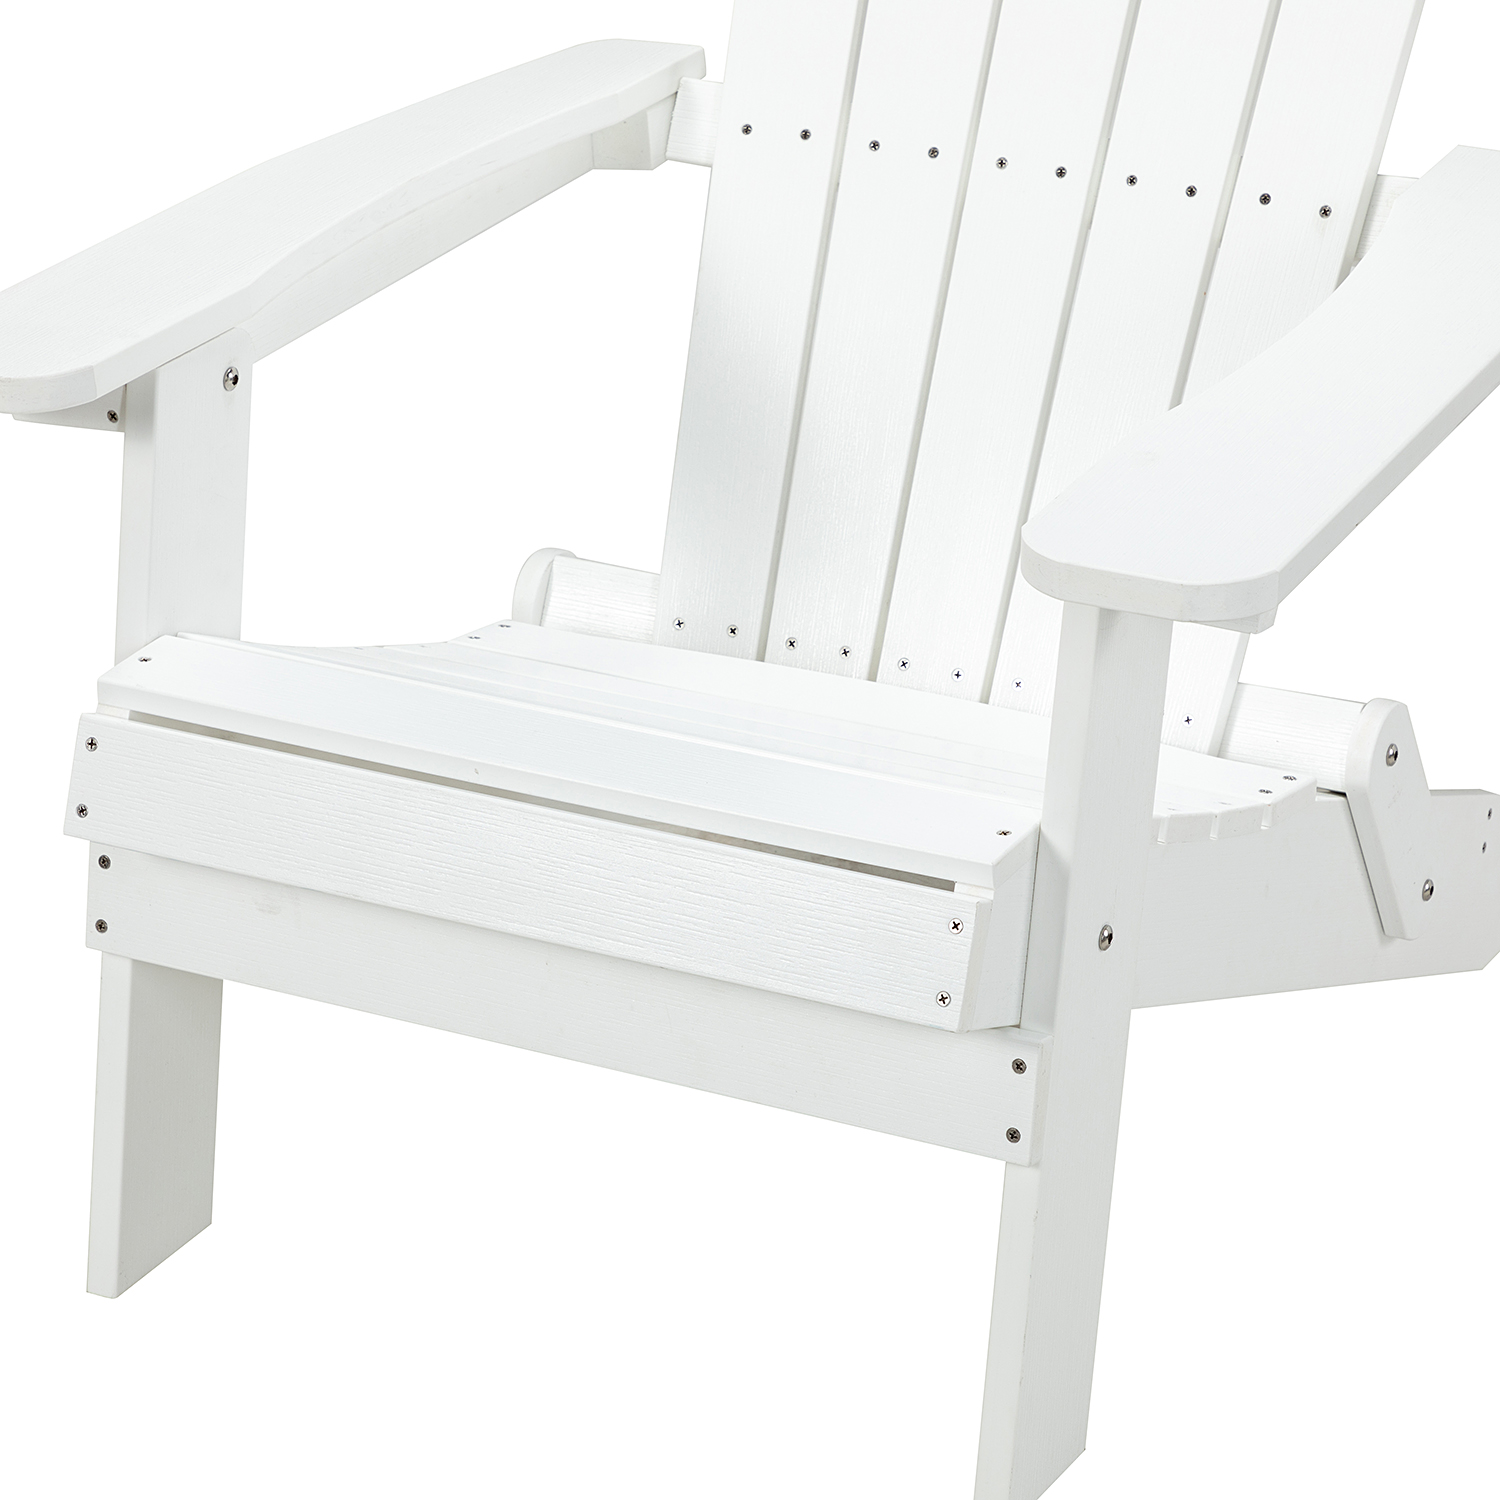 Folding Plastic Chair,Folding All-Weather Patio Chair,High Back Plastic Resin Deck Chair,Painted Weather Resistant Chair for Garden Backyard Porch,Easy to Fold Move & Maintain,Outdoor Furniture,White - image 5 of 7